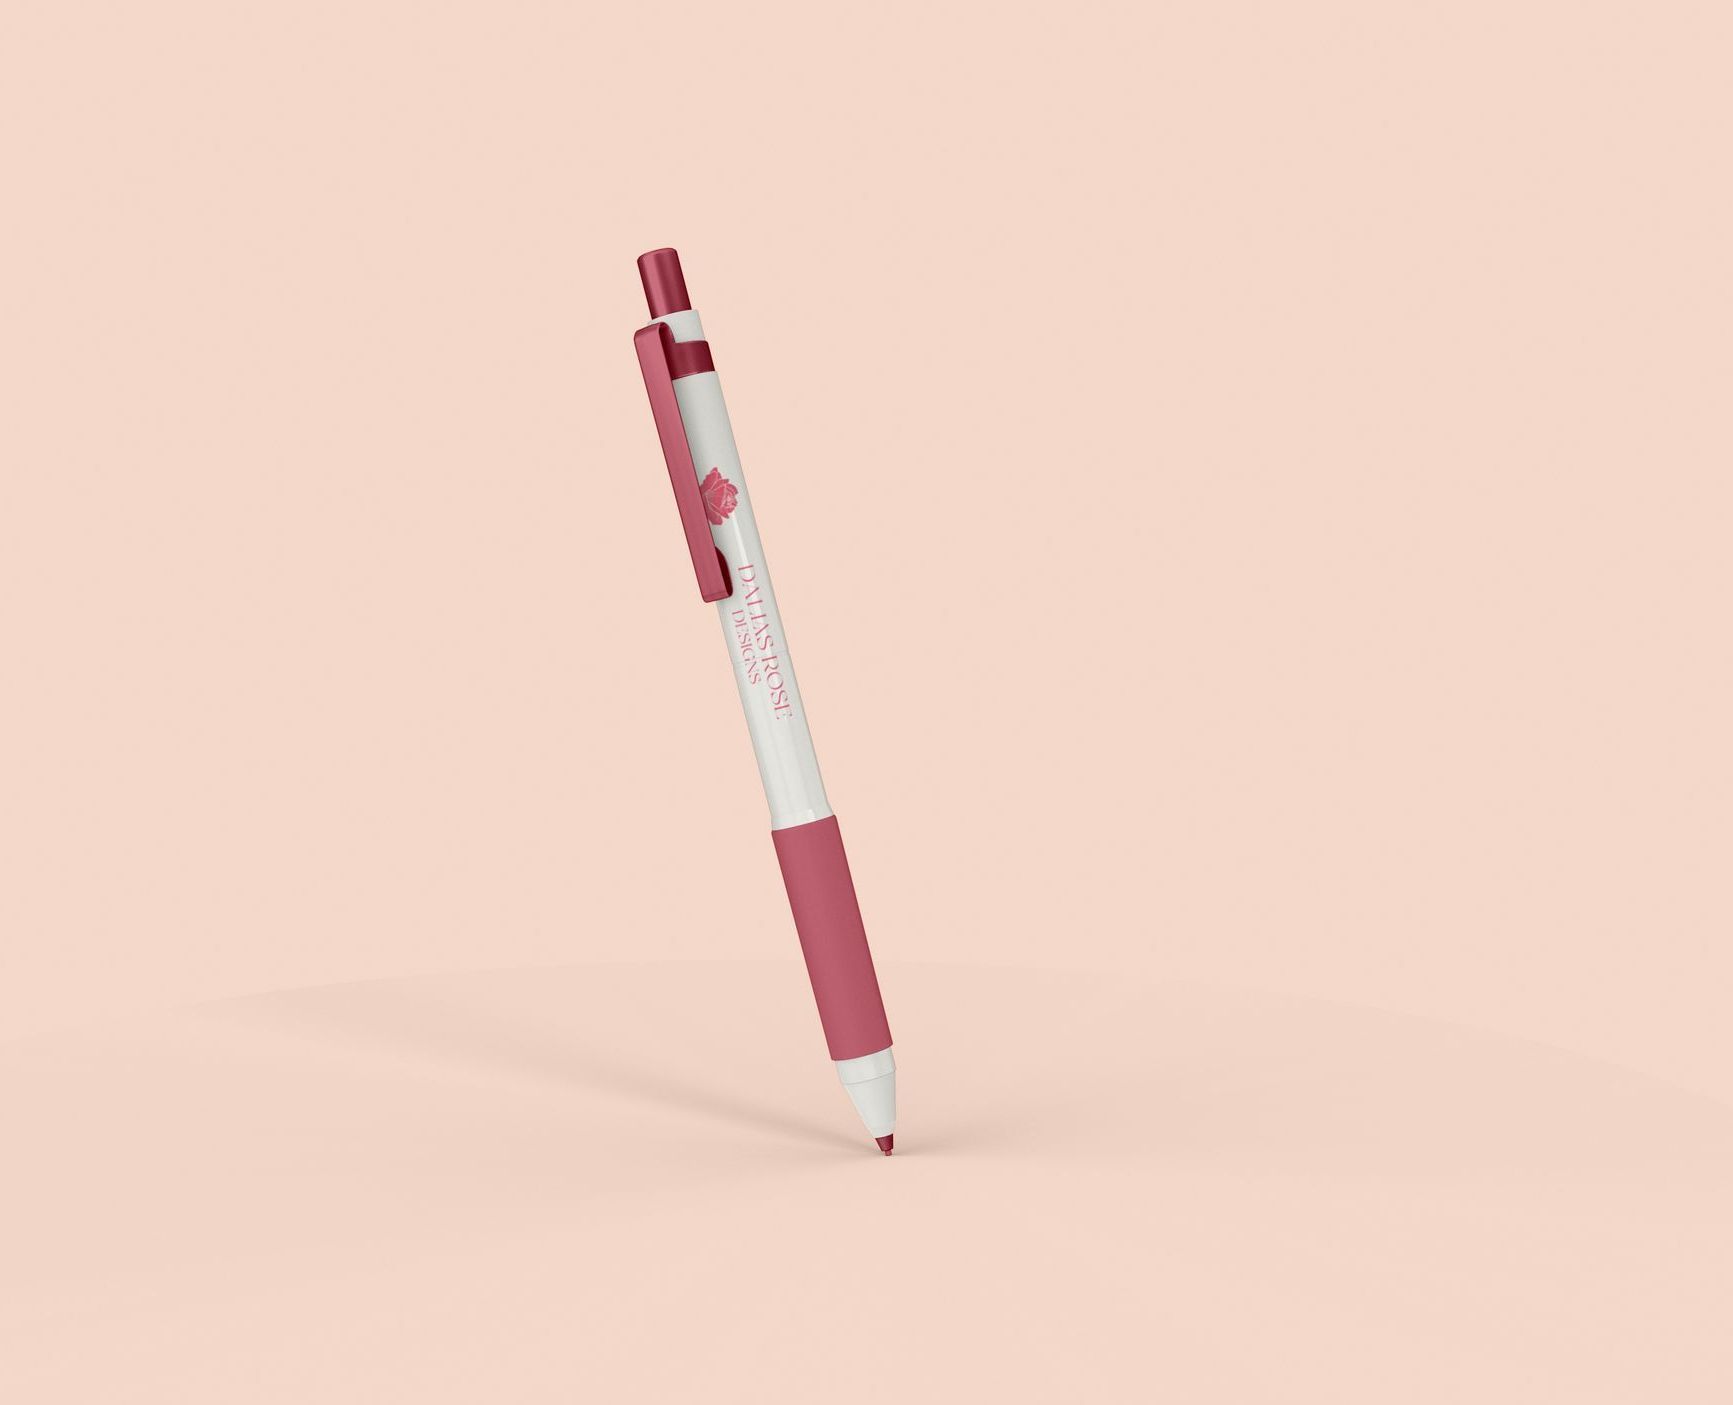 A pink and white pen is sitting on a pink surface.